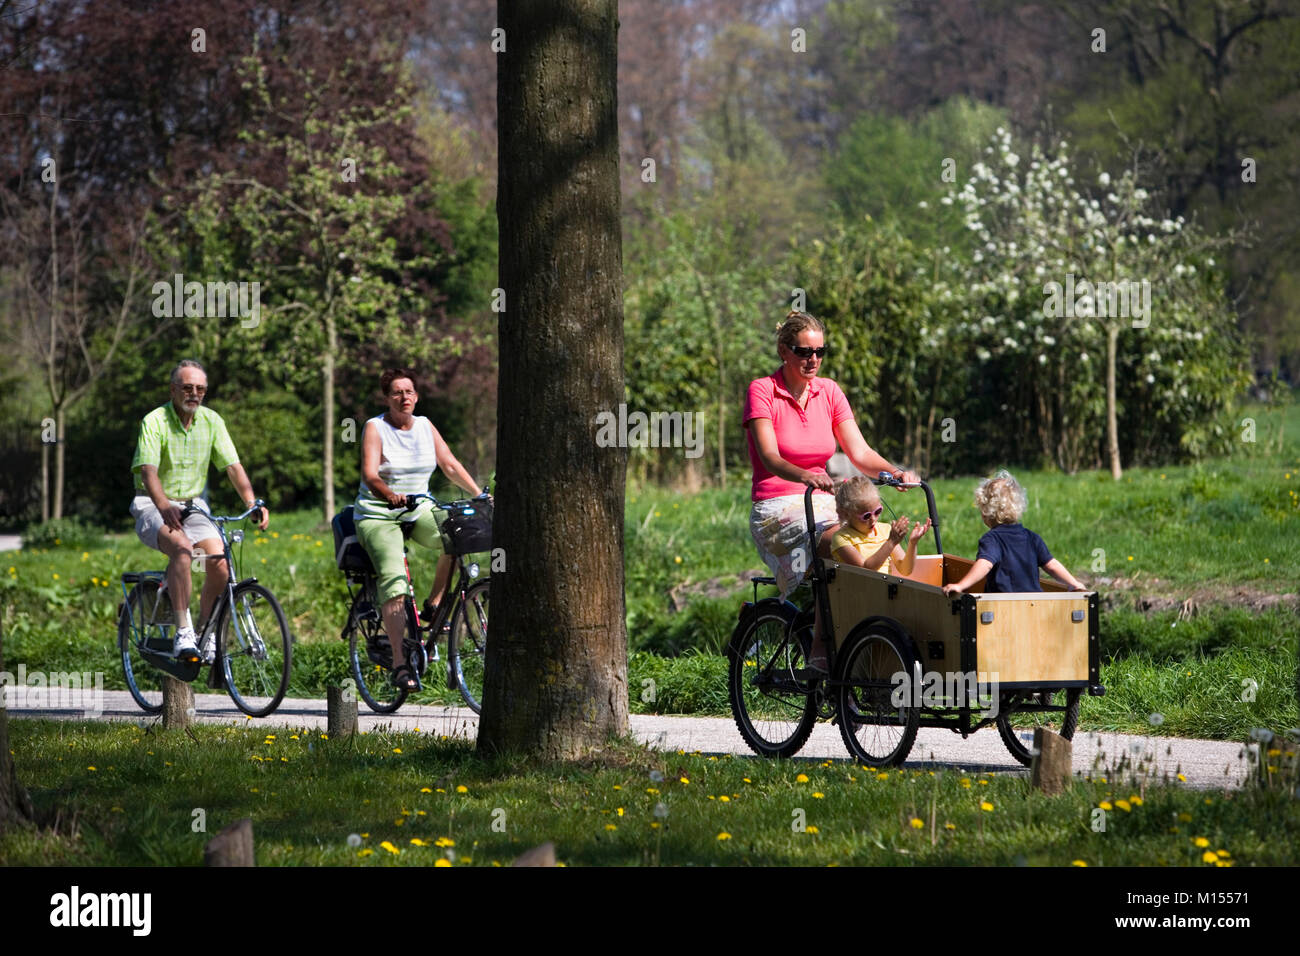 The Netherlands, 's-Graveland. Mother and 2 children on adapted bicycle. Stock Photo